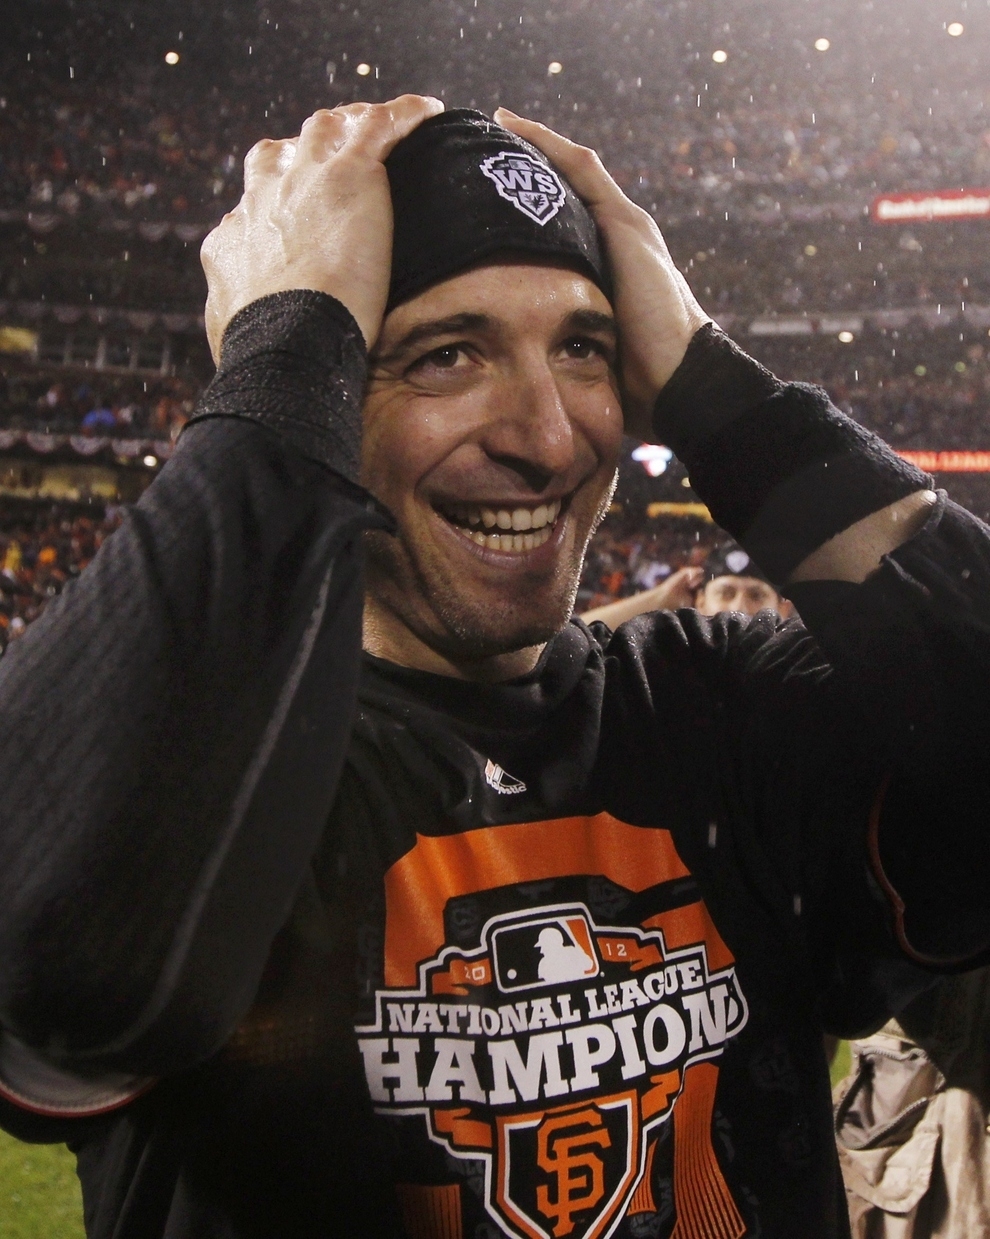 THE GIANTS ARE GOING TO THE WORLD SERIES! AGAIN!